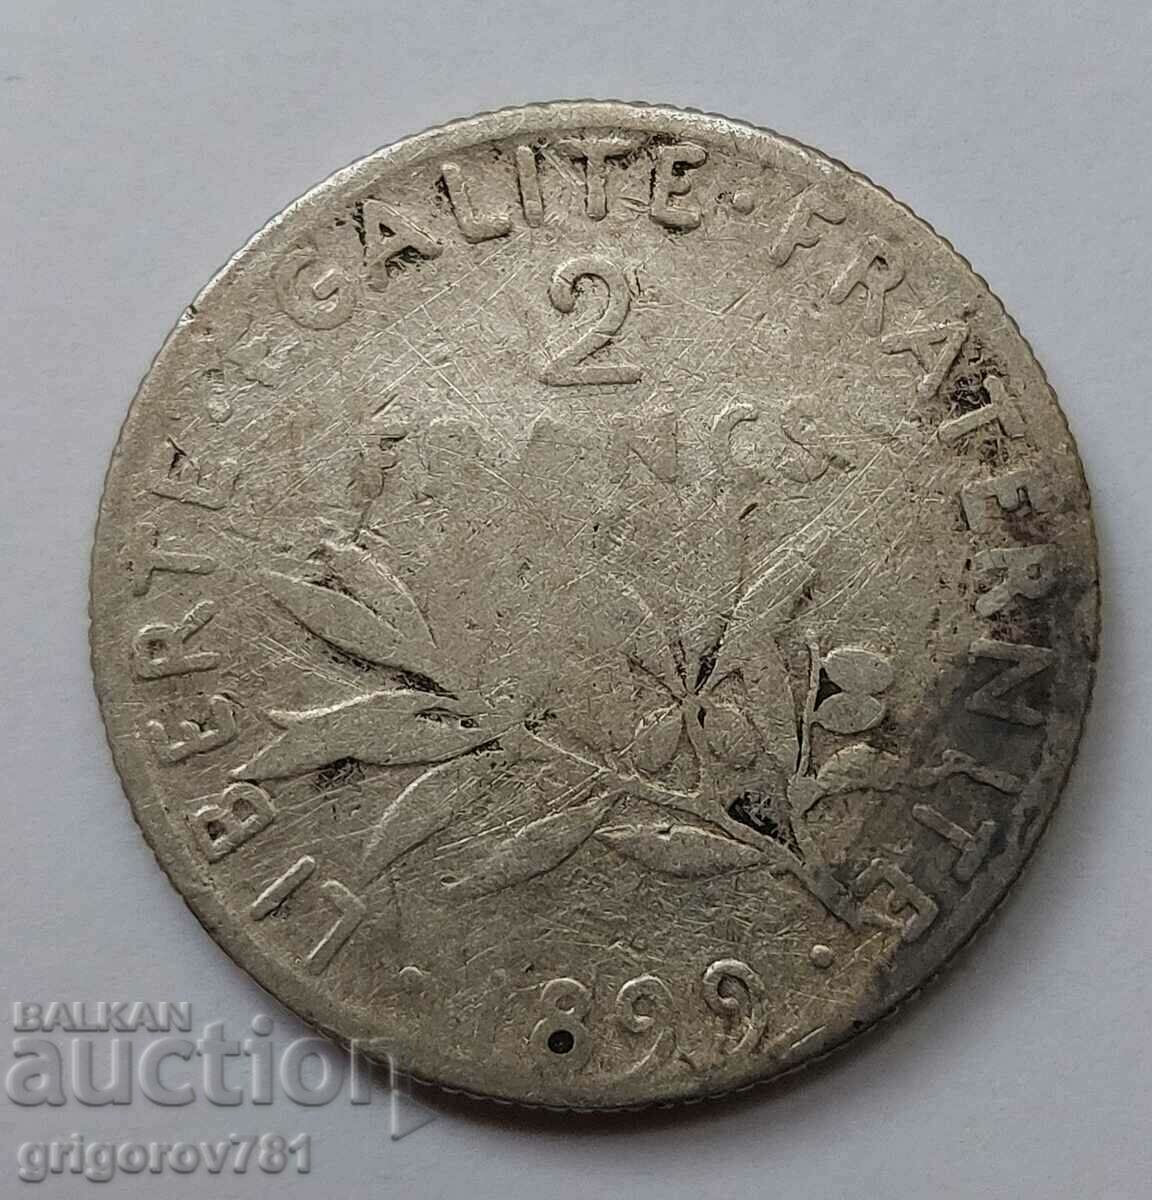 2 Francs Silver France 1899 - Silver Coin #151